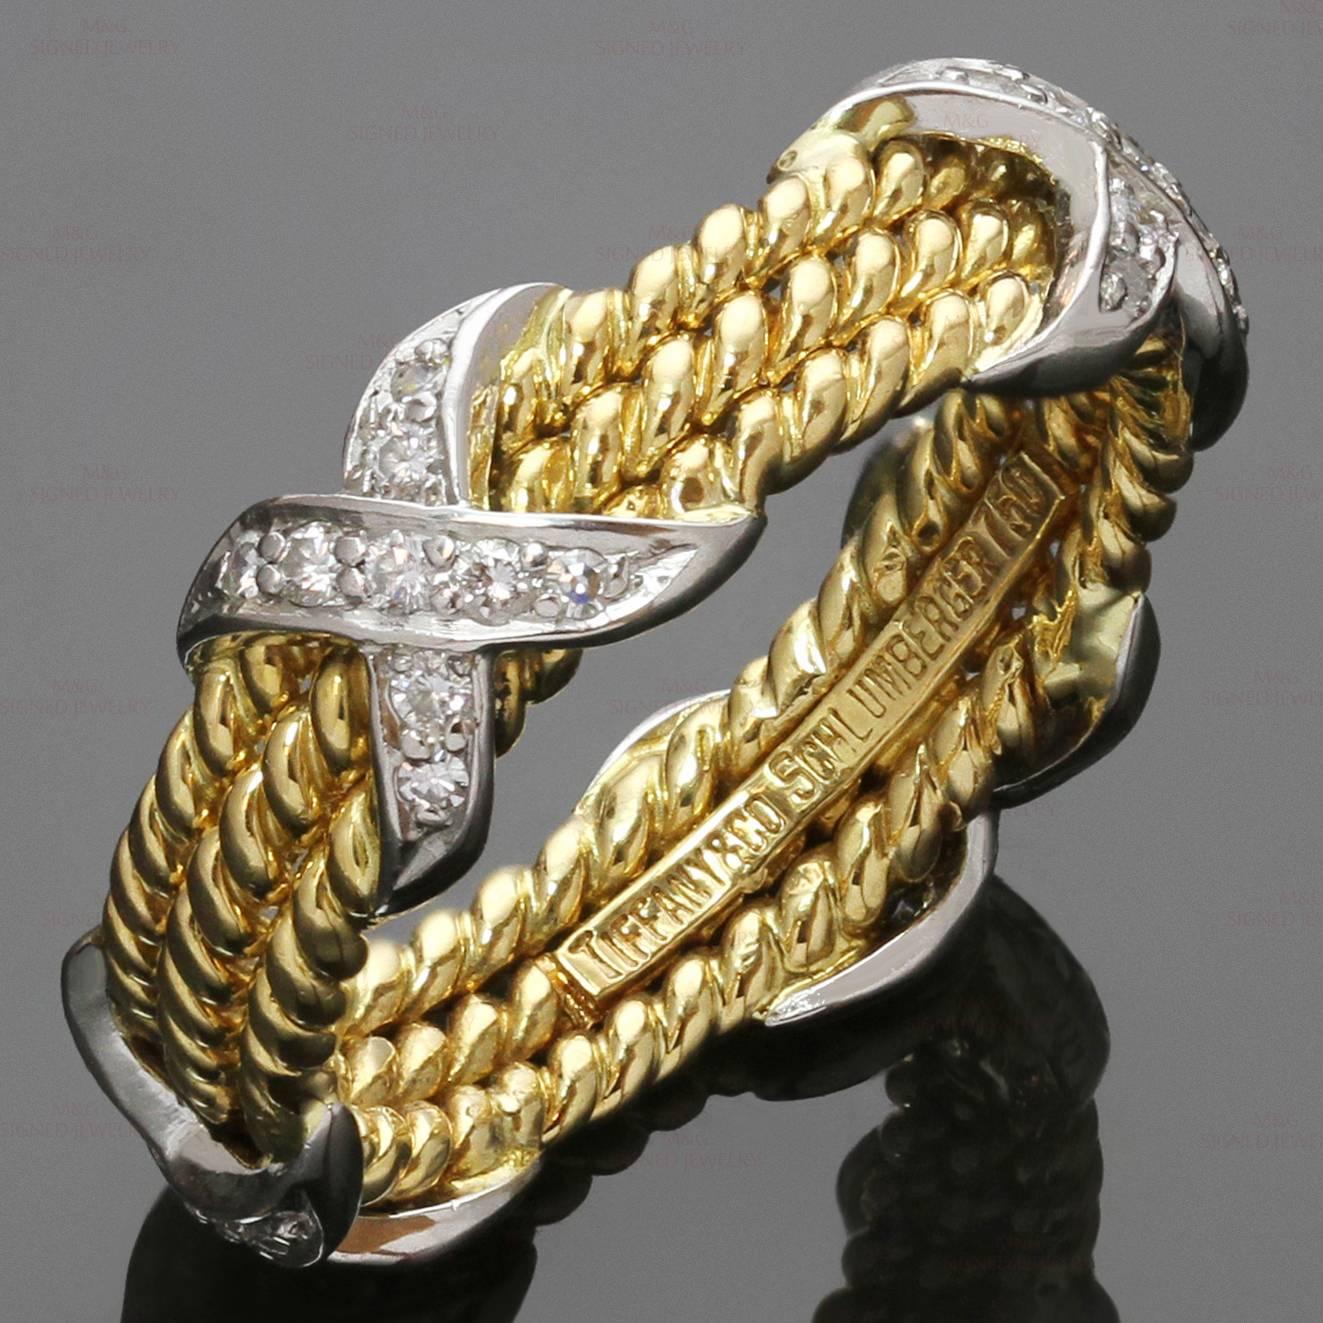 This classic Tiffany & Co. ring was designed by Jean Schlumberger and features a 3-row rope design crafted in 18k yellow gold and accented with 4 platinum X motifs set with brilliant-cut round diamonds of an estimated 0.28 carats. Made in United